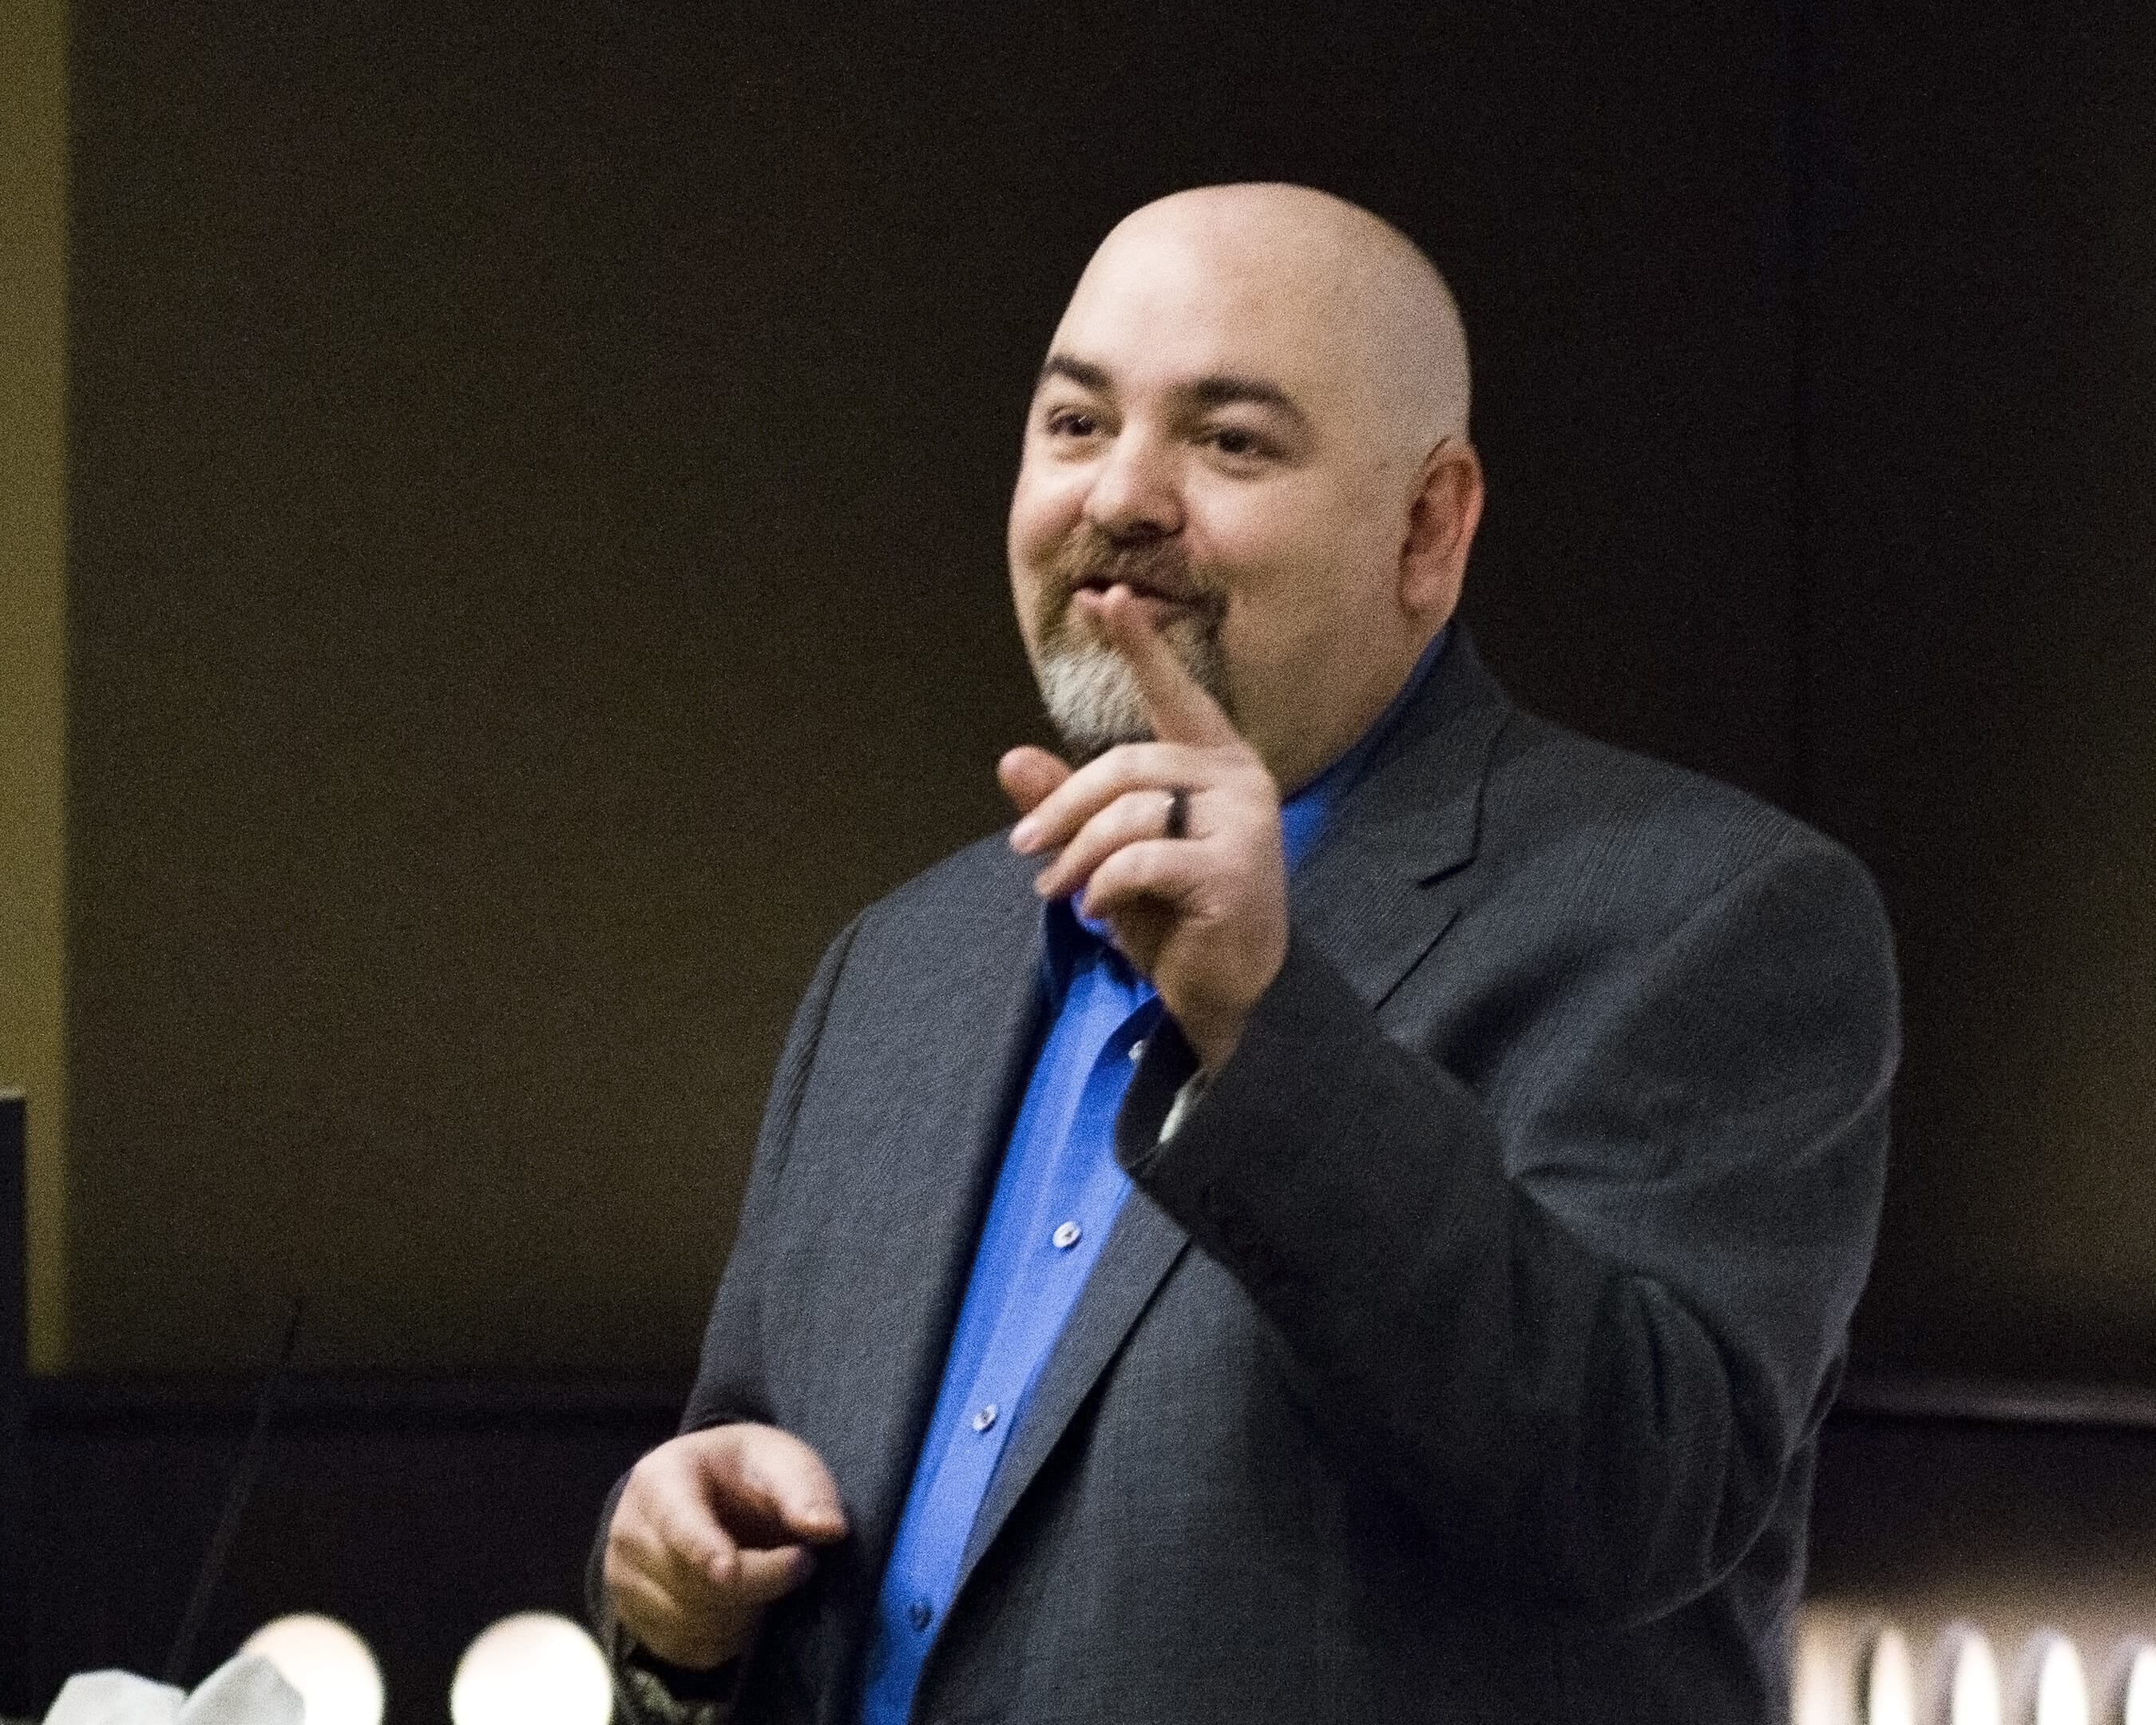 Matt Dillahunty is a well known atheist and host of The Atheist Experience talk show.